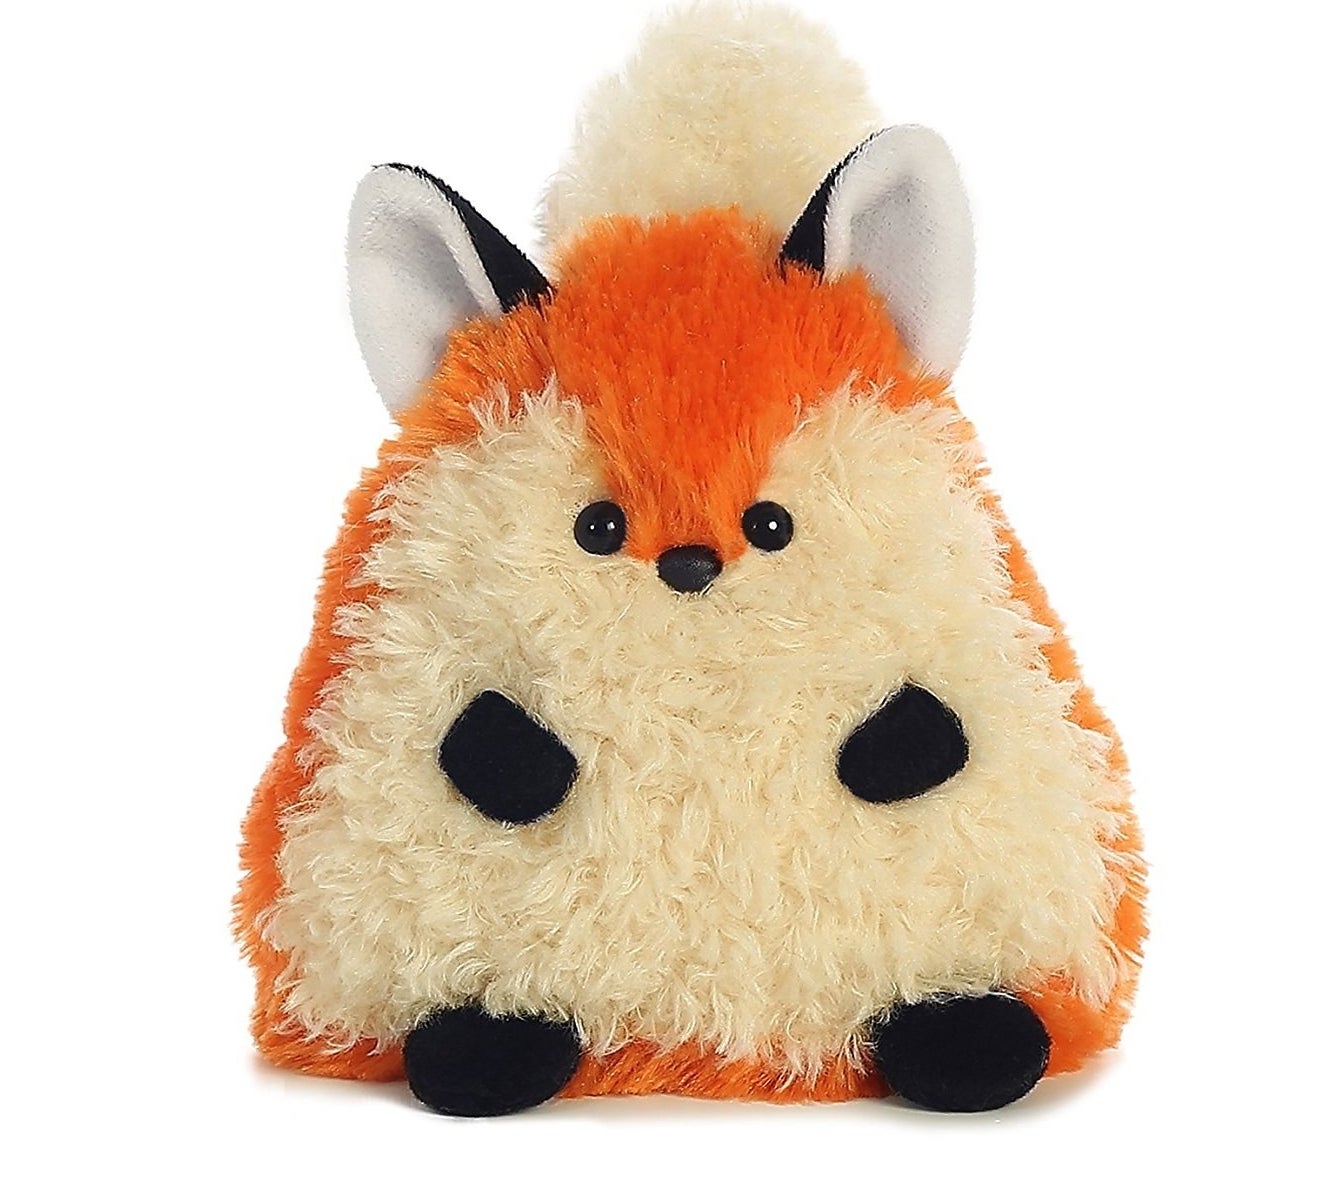 35 Adorable Stuffed Toys Even Adults Will Want